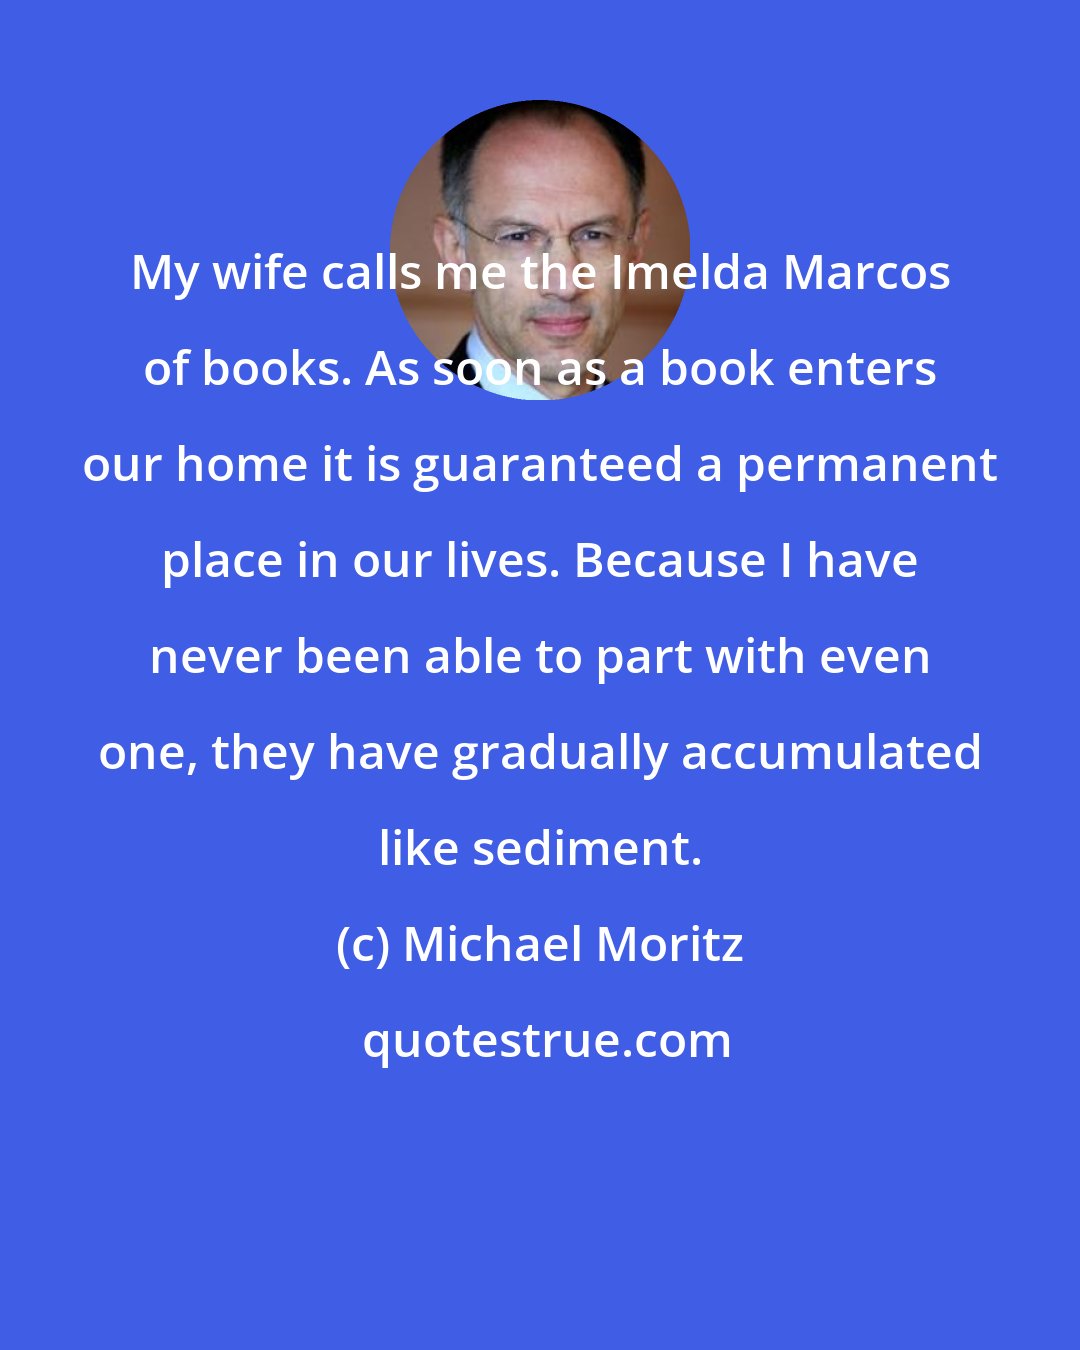 Michael Moritz: My wife calls me the Imelda Marcos of books. As soon as a book enters our home it is guaranteed a permanent place in our lives. Because I have never been able to part with even one, they have gradually accumulated like sediment.